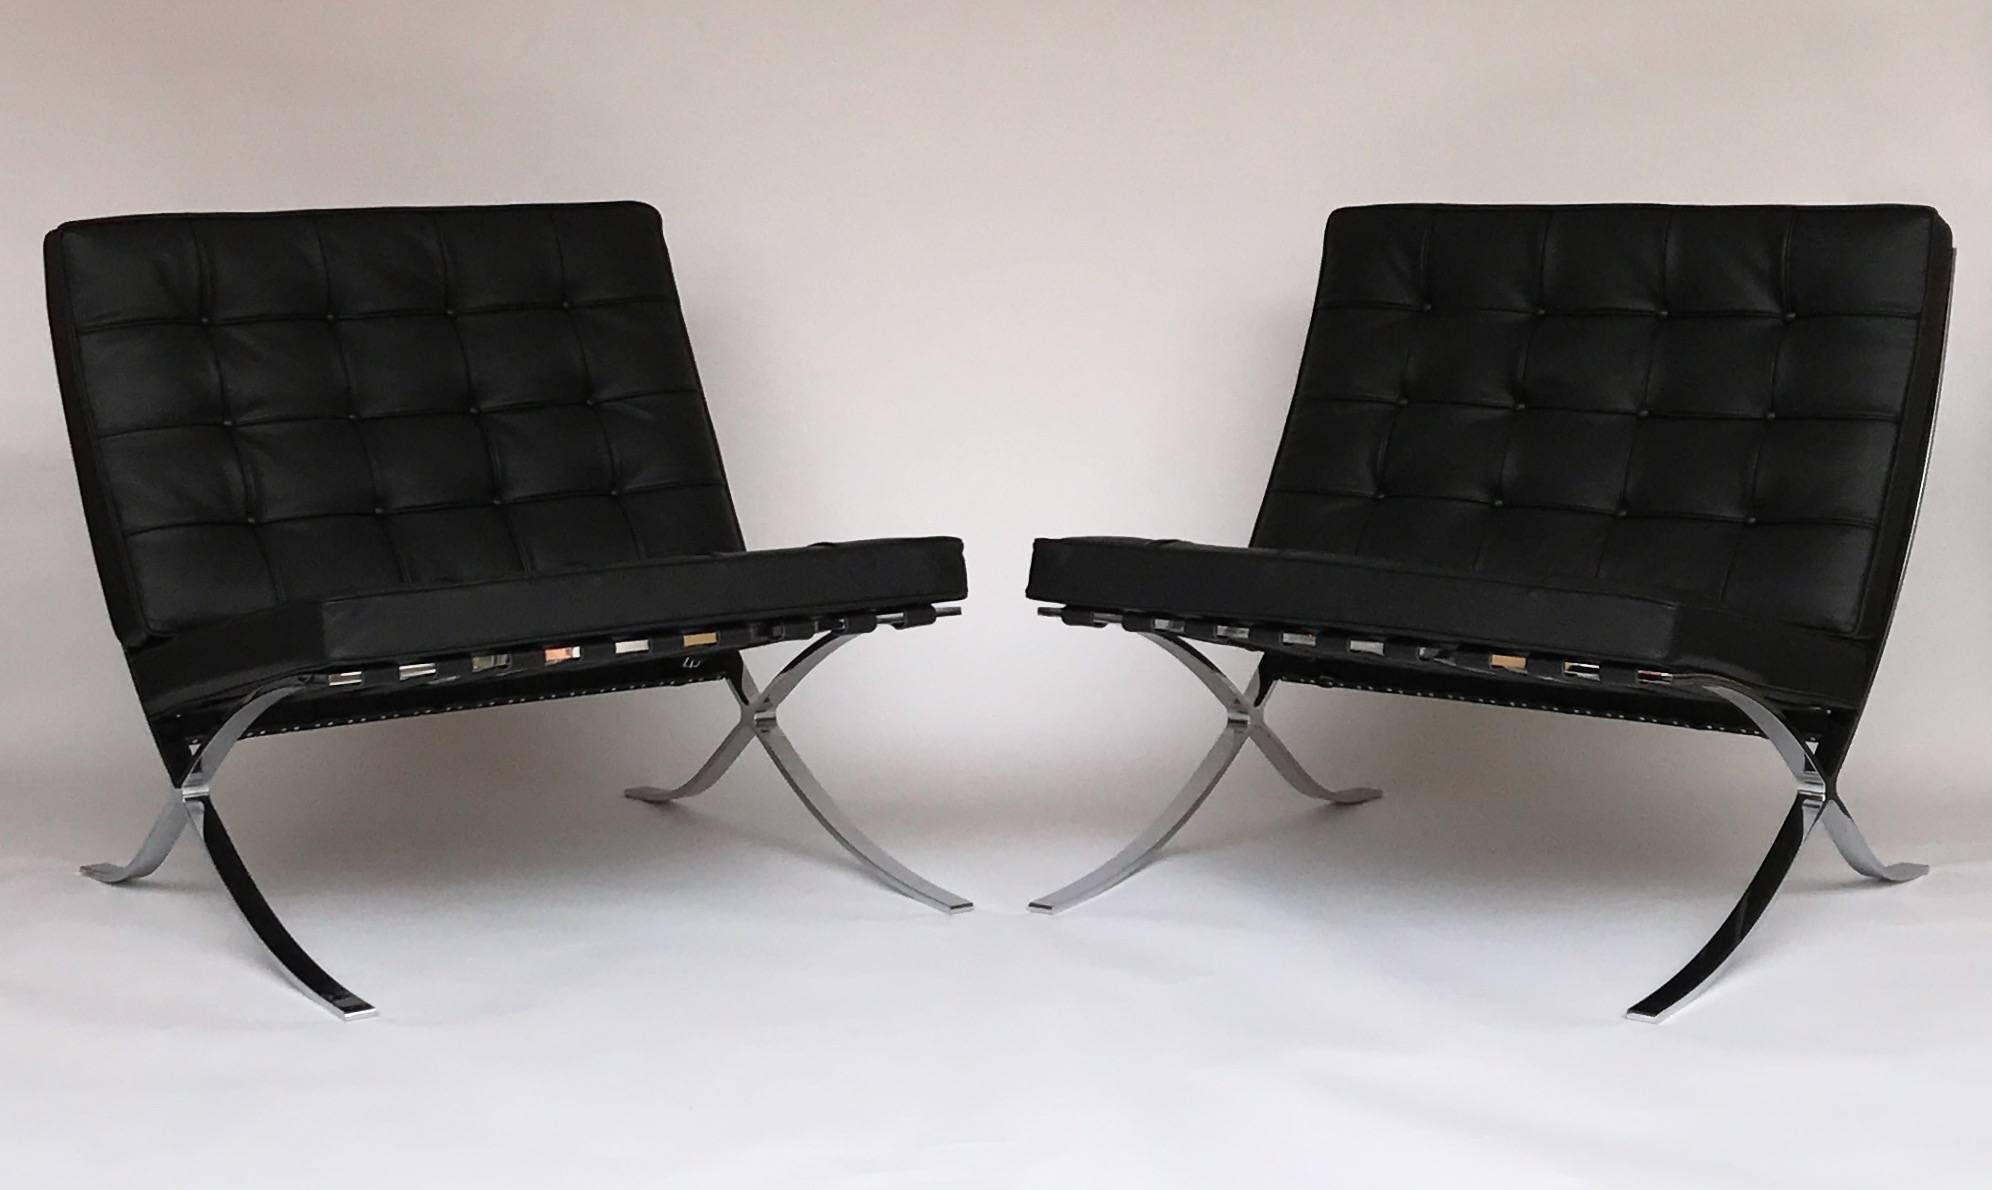 Four armchairs or lounge chairs, living room set model Barcelona in veluto black leather by the designer Ludwig Mies van der Rohe for the editor Knoll. Iconic chair of the 20th century design. Engraved in metal Knoll Studio signature of Mies Van der